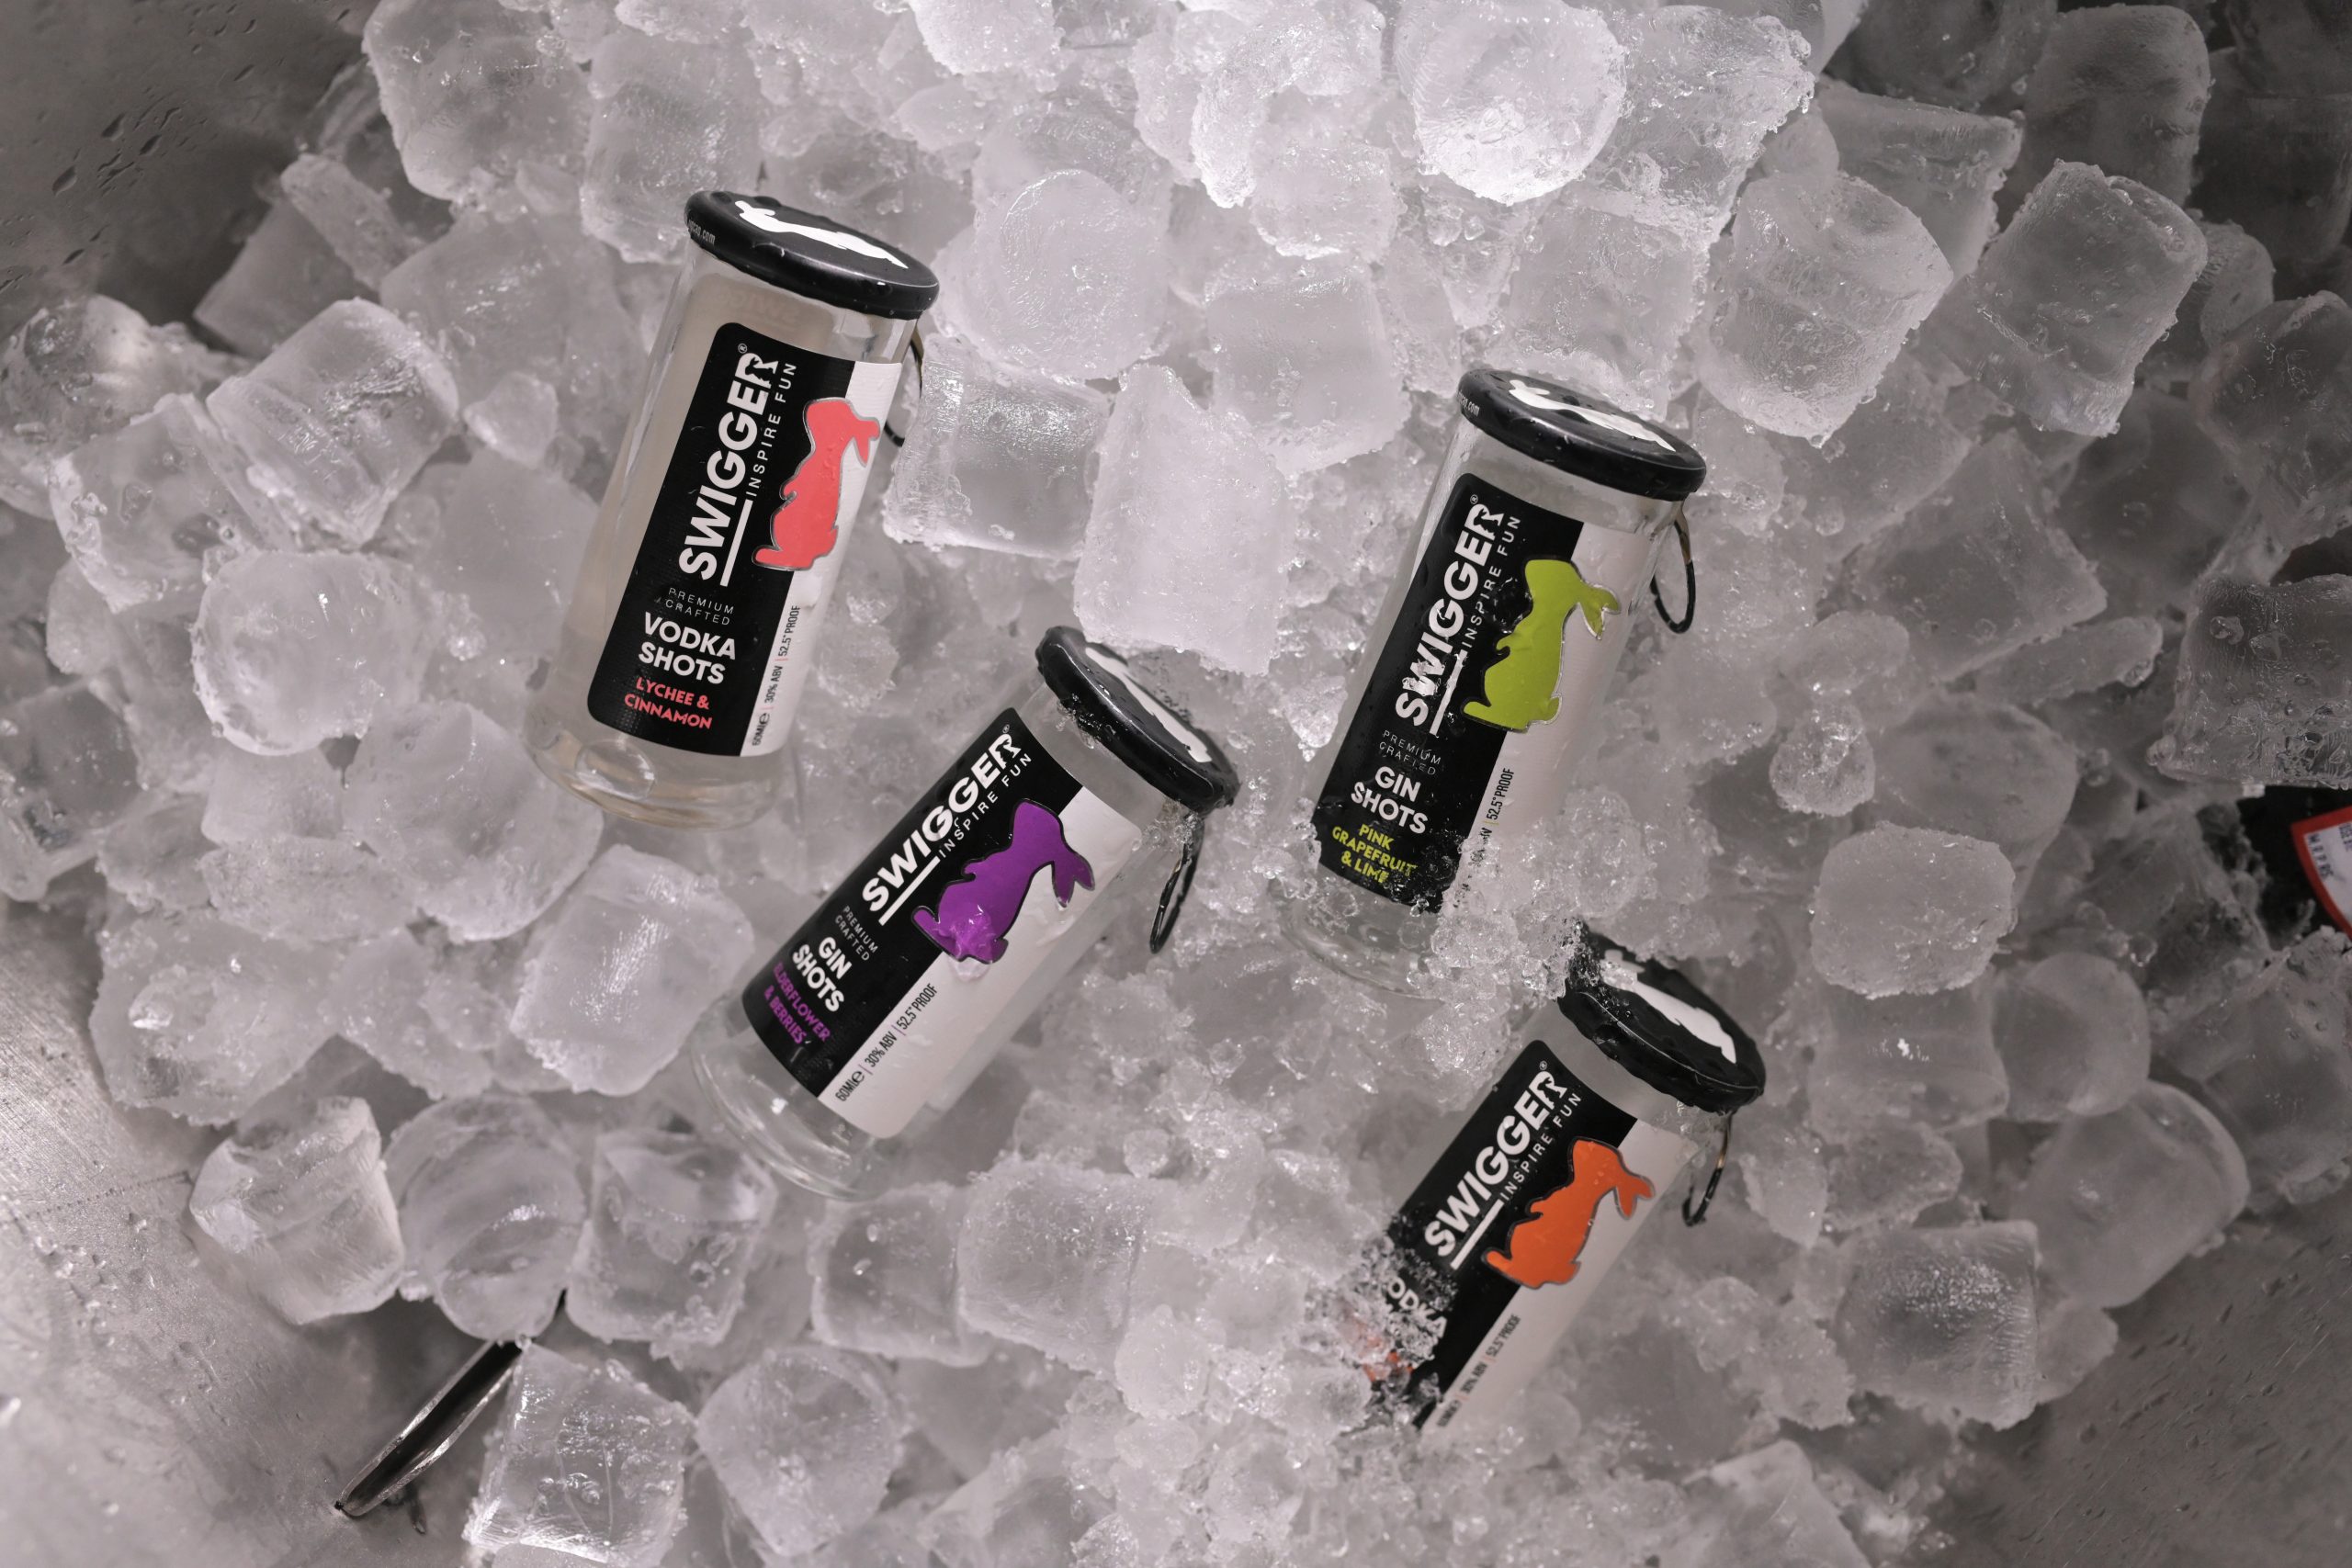 India’s First Spirits-Based Ready-to-Drink Shots SWIGGER launched 25